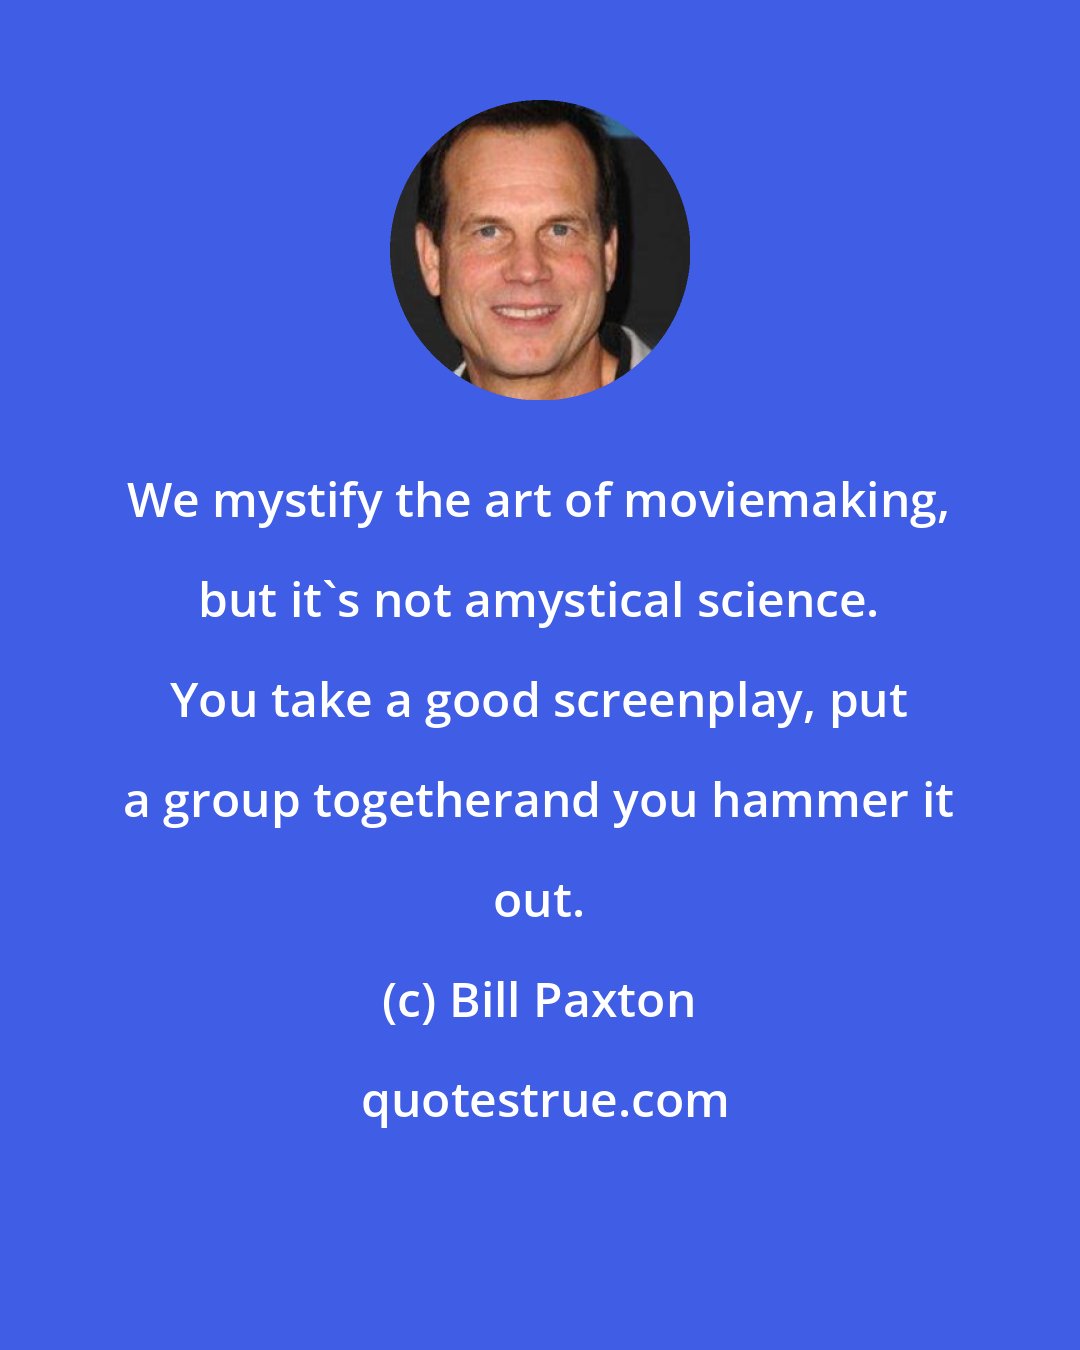 Bill Paxton: We mystify the art of moviemaking, but it's not amystical science. You take a good screenplay, put a group togetherand you hammer it out.